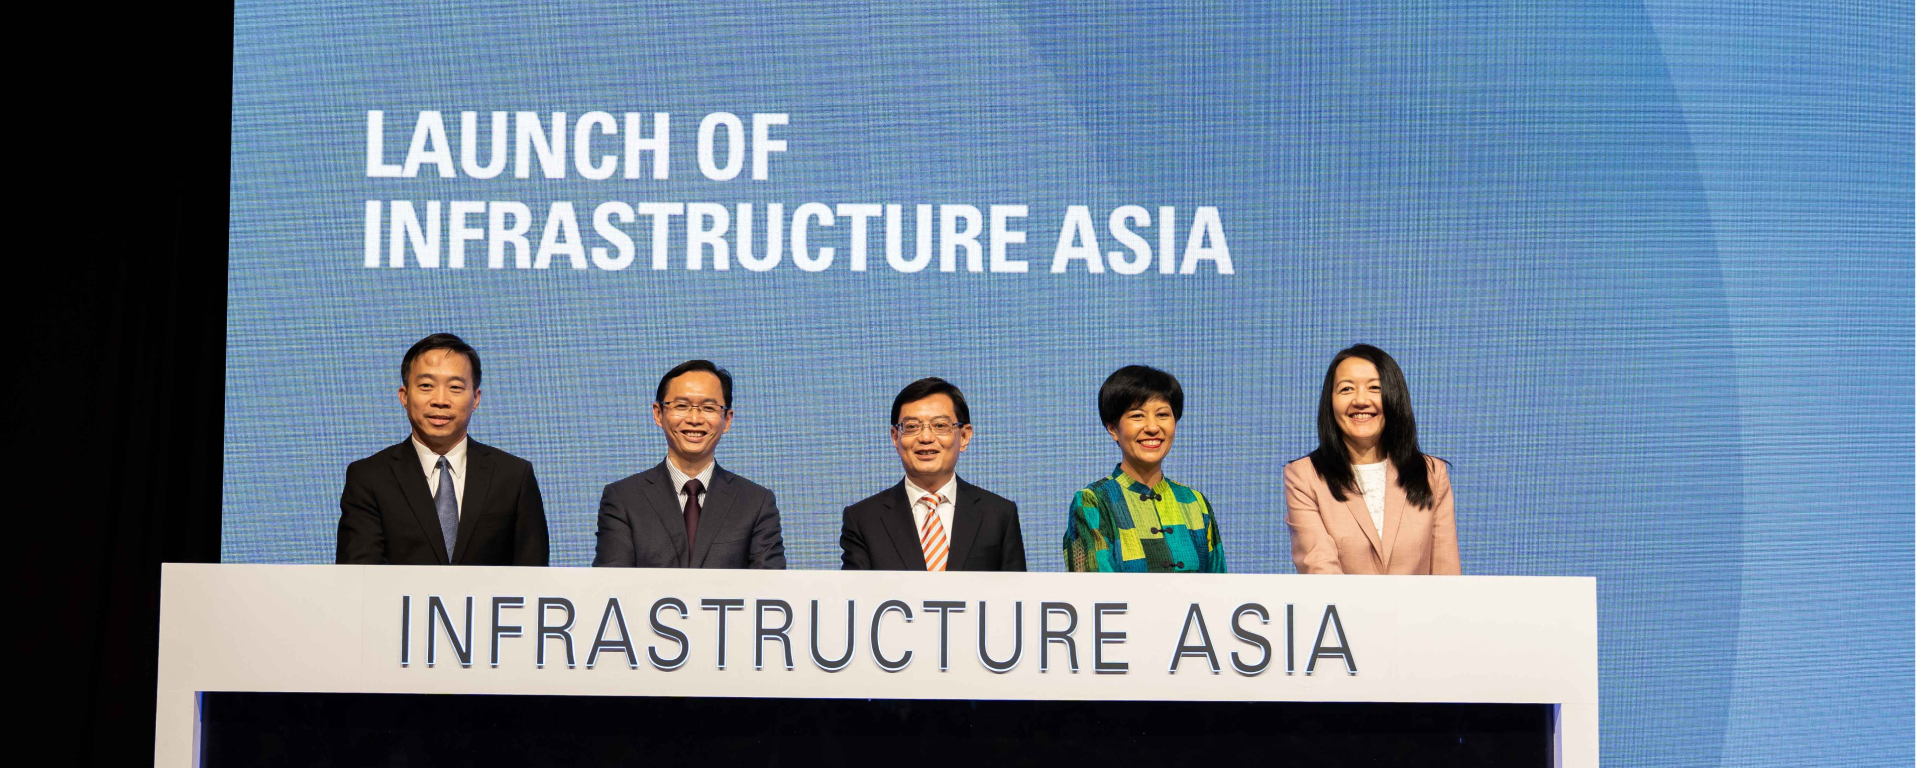 Official launch of Infrastructure Asia at the Asia-Singapore Infrastructure Roundtable